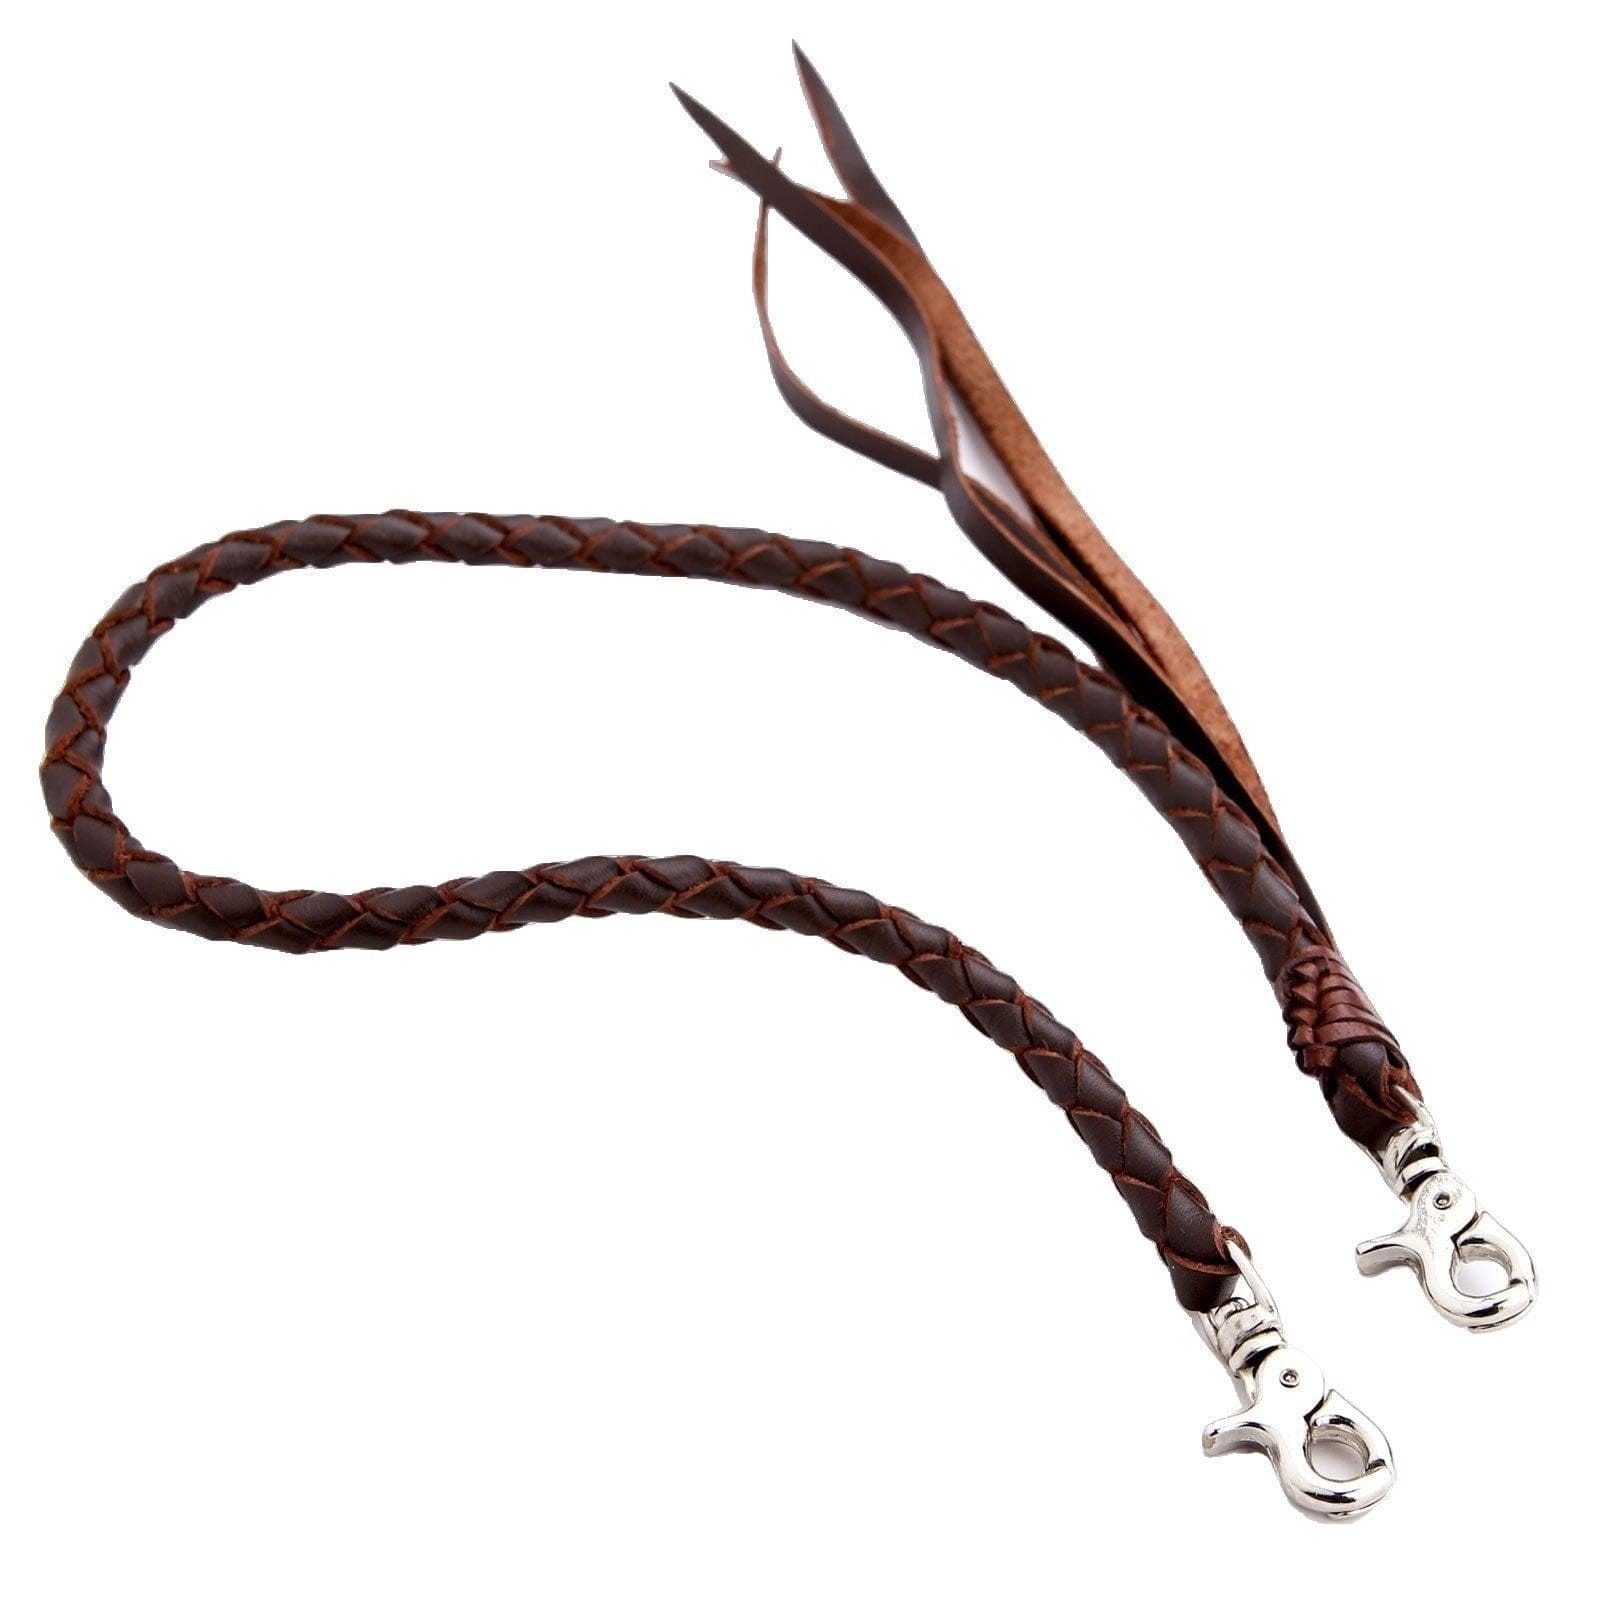  Customer reviews: Genuine Leather Braided Handle for